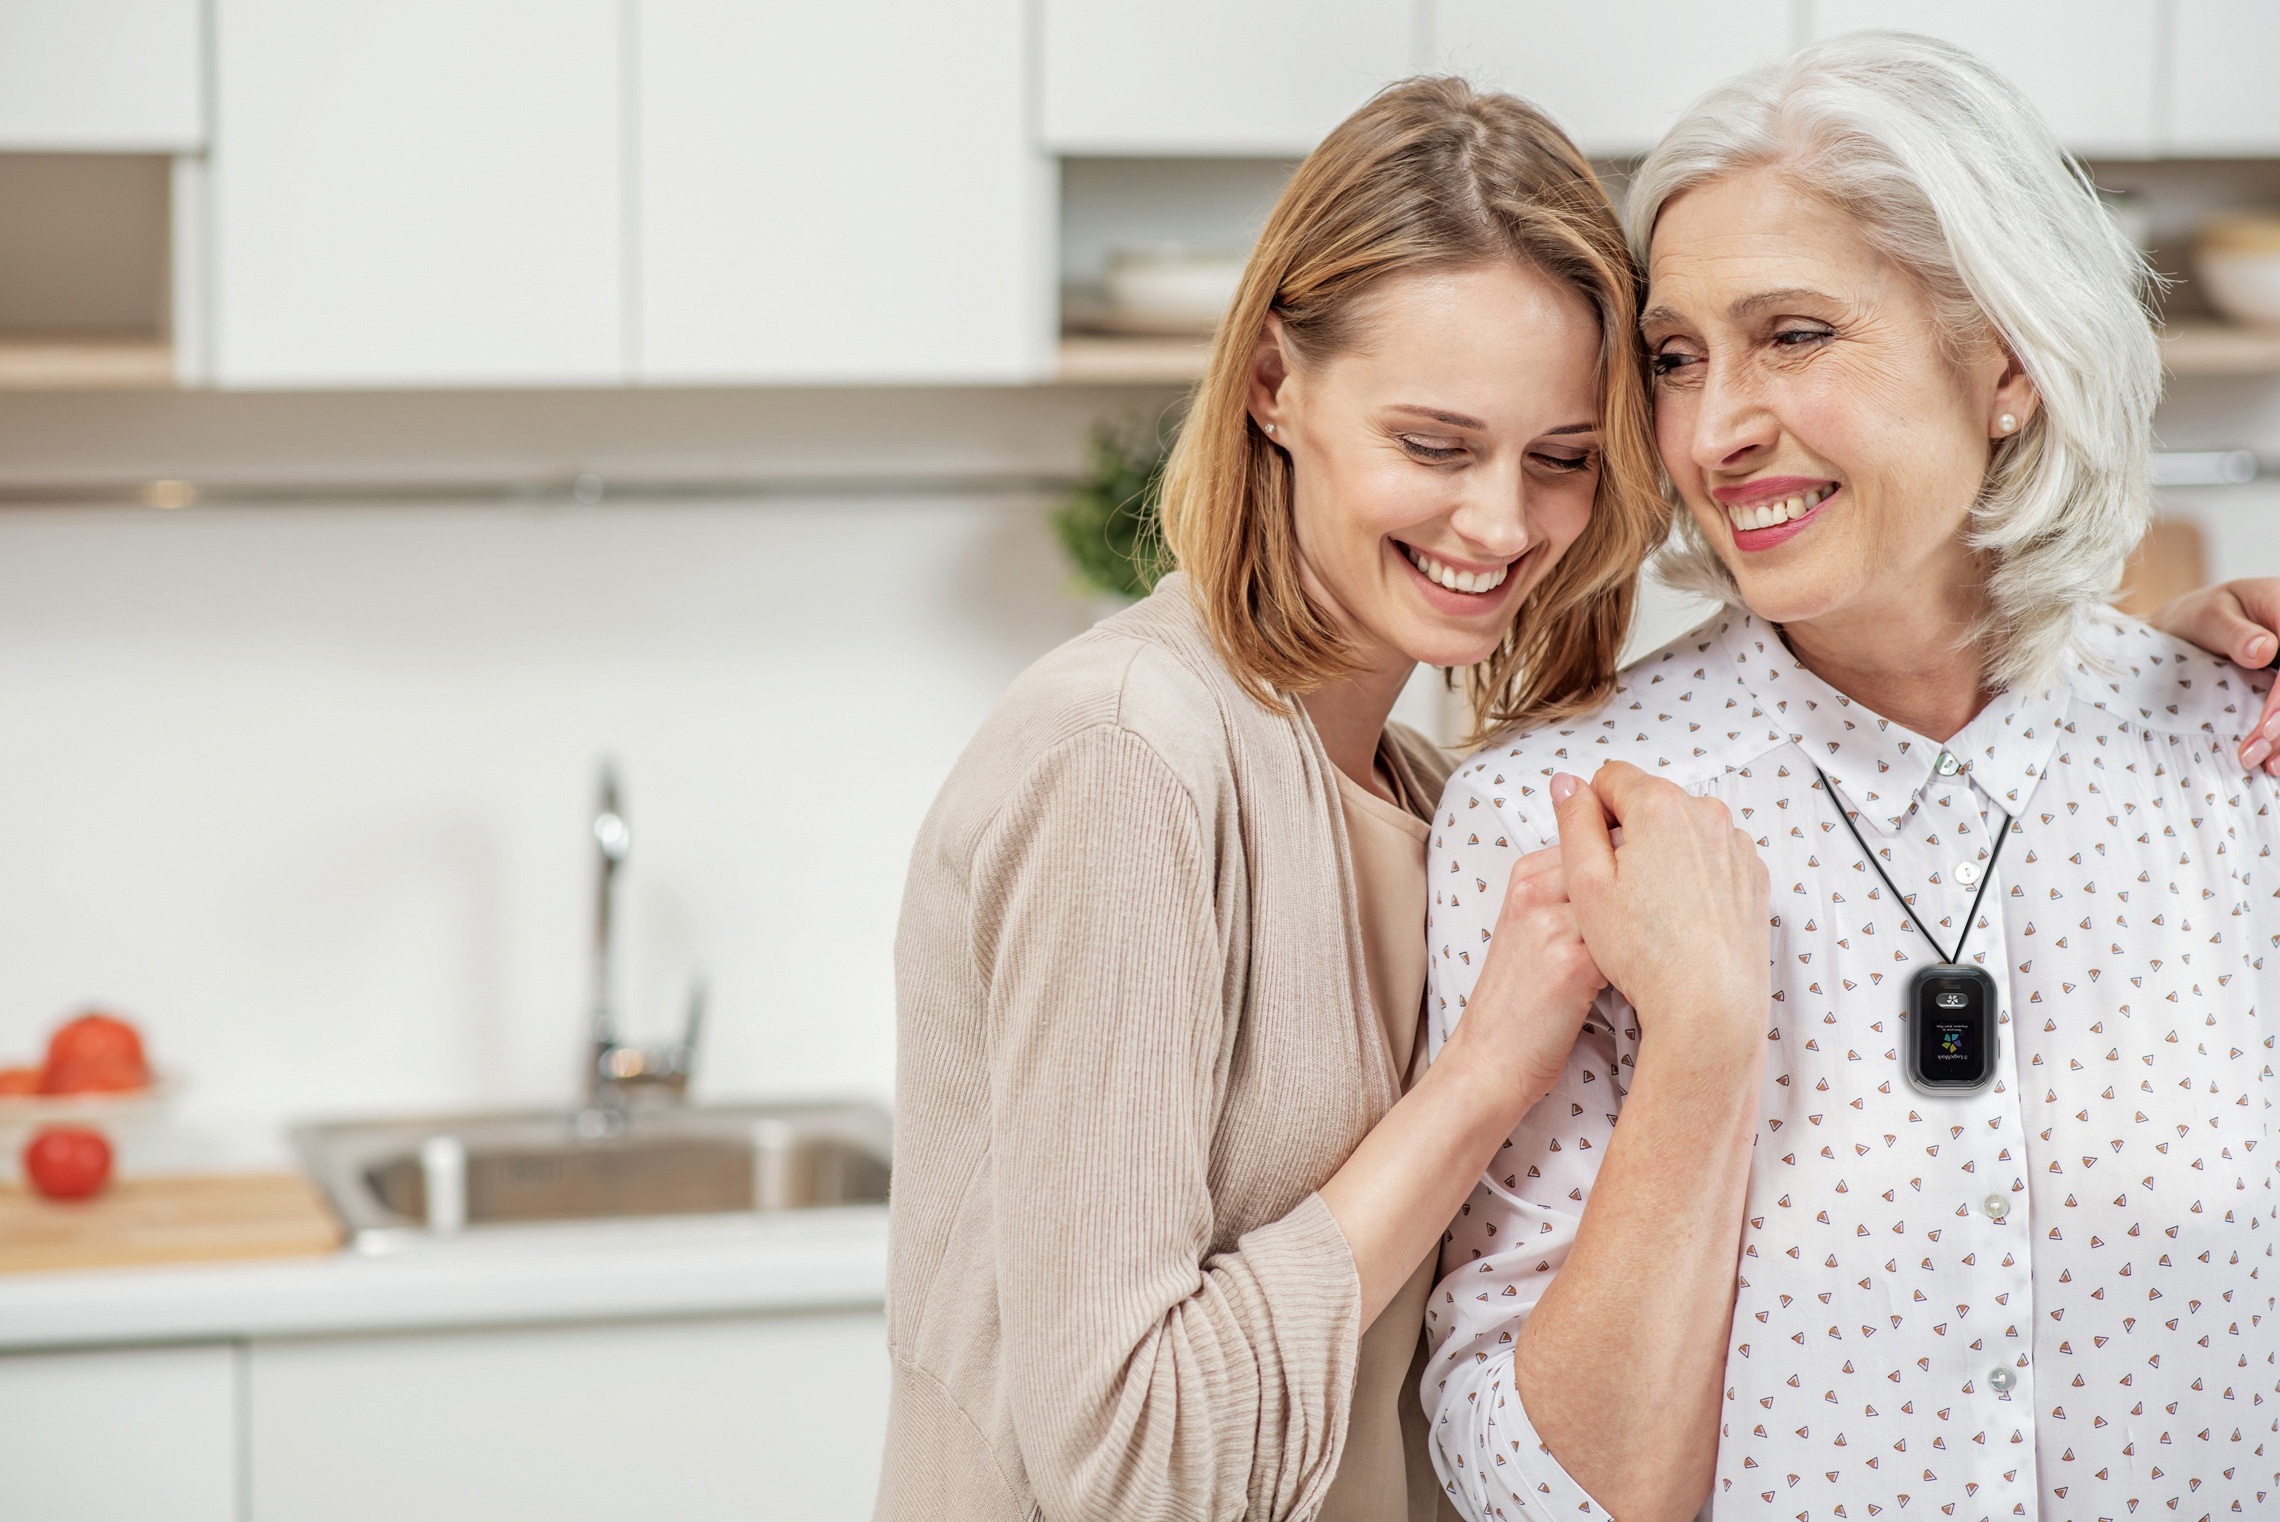 A senior woman and younger woman look at each other and smile as they stand in the kitchen.